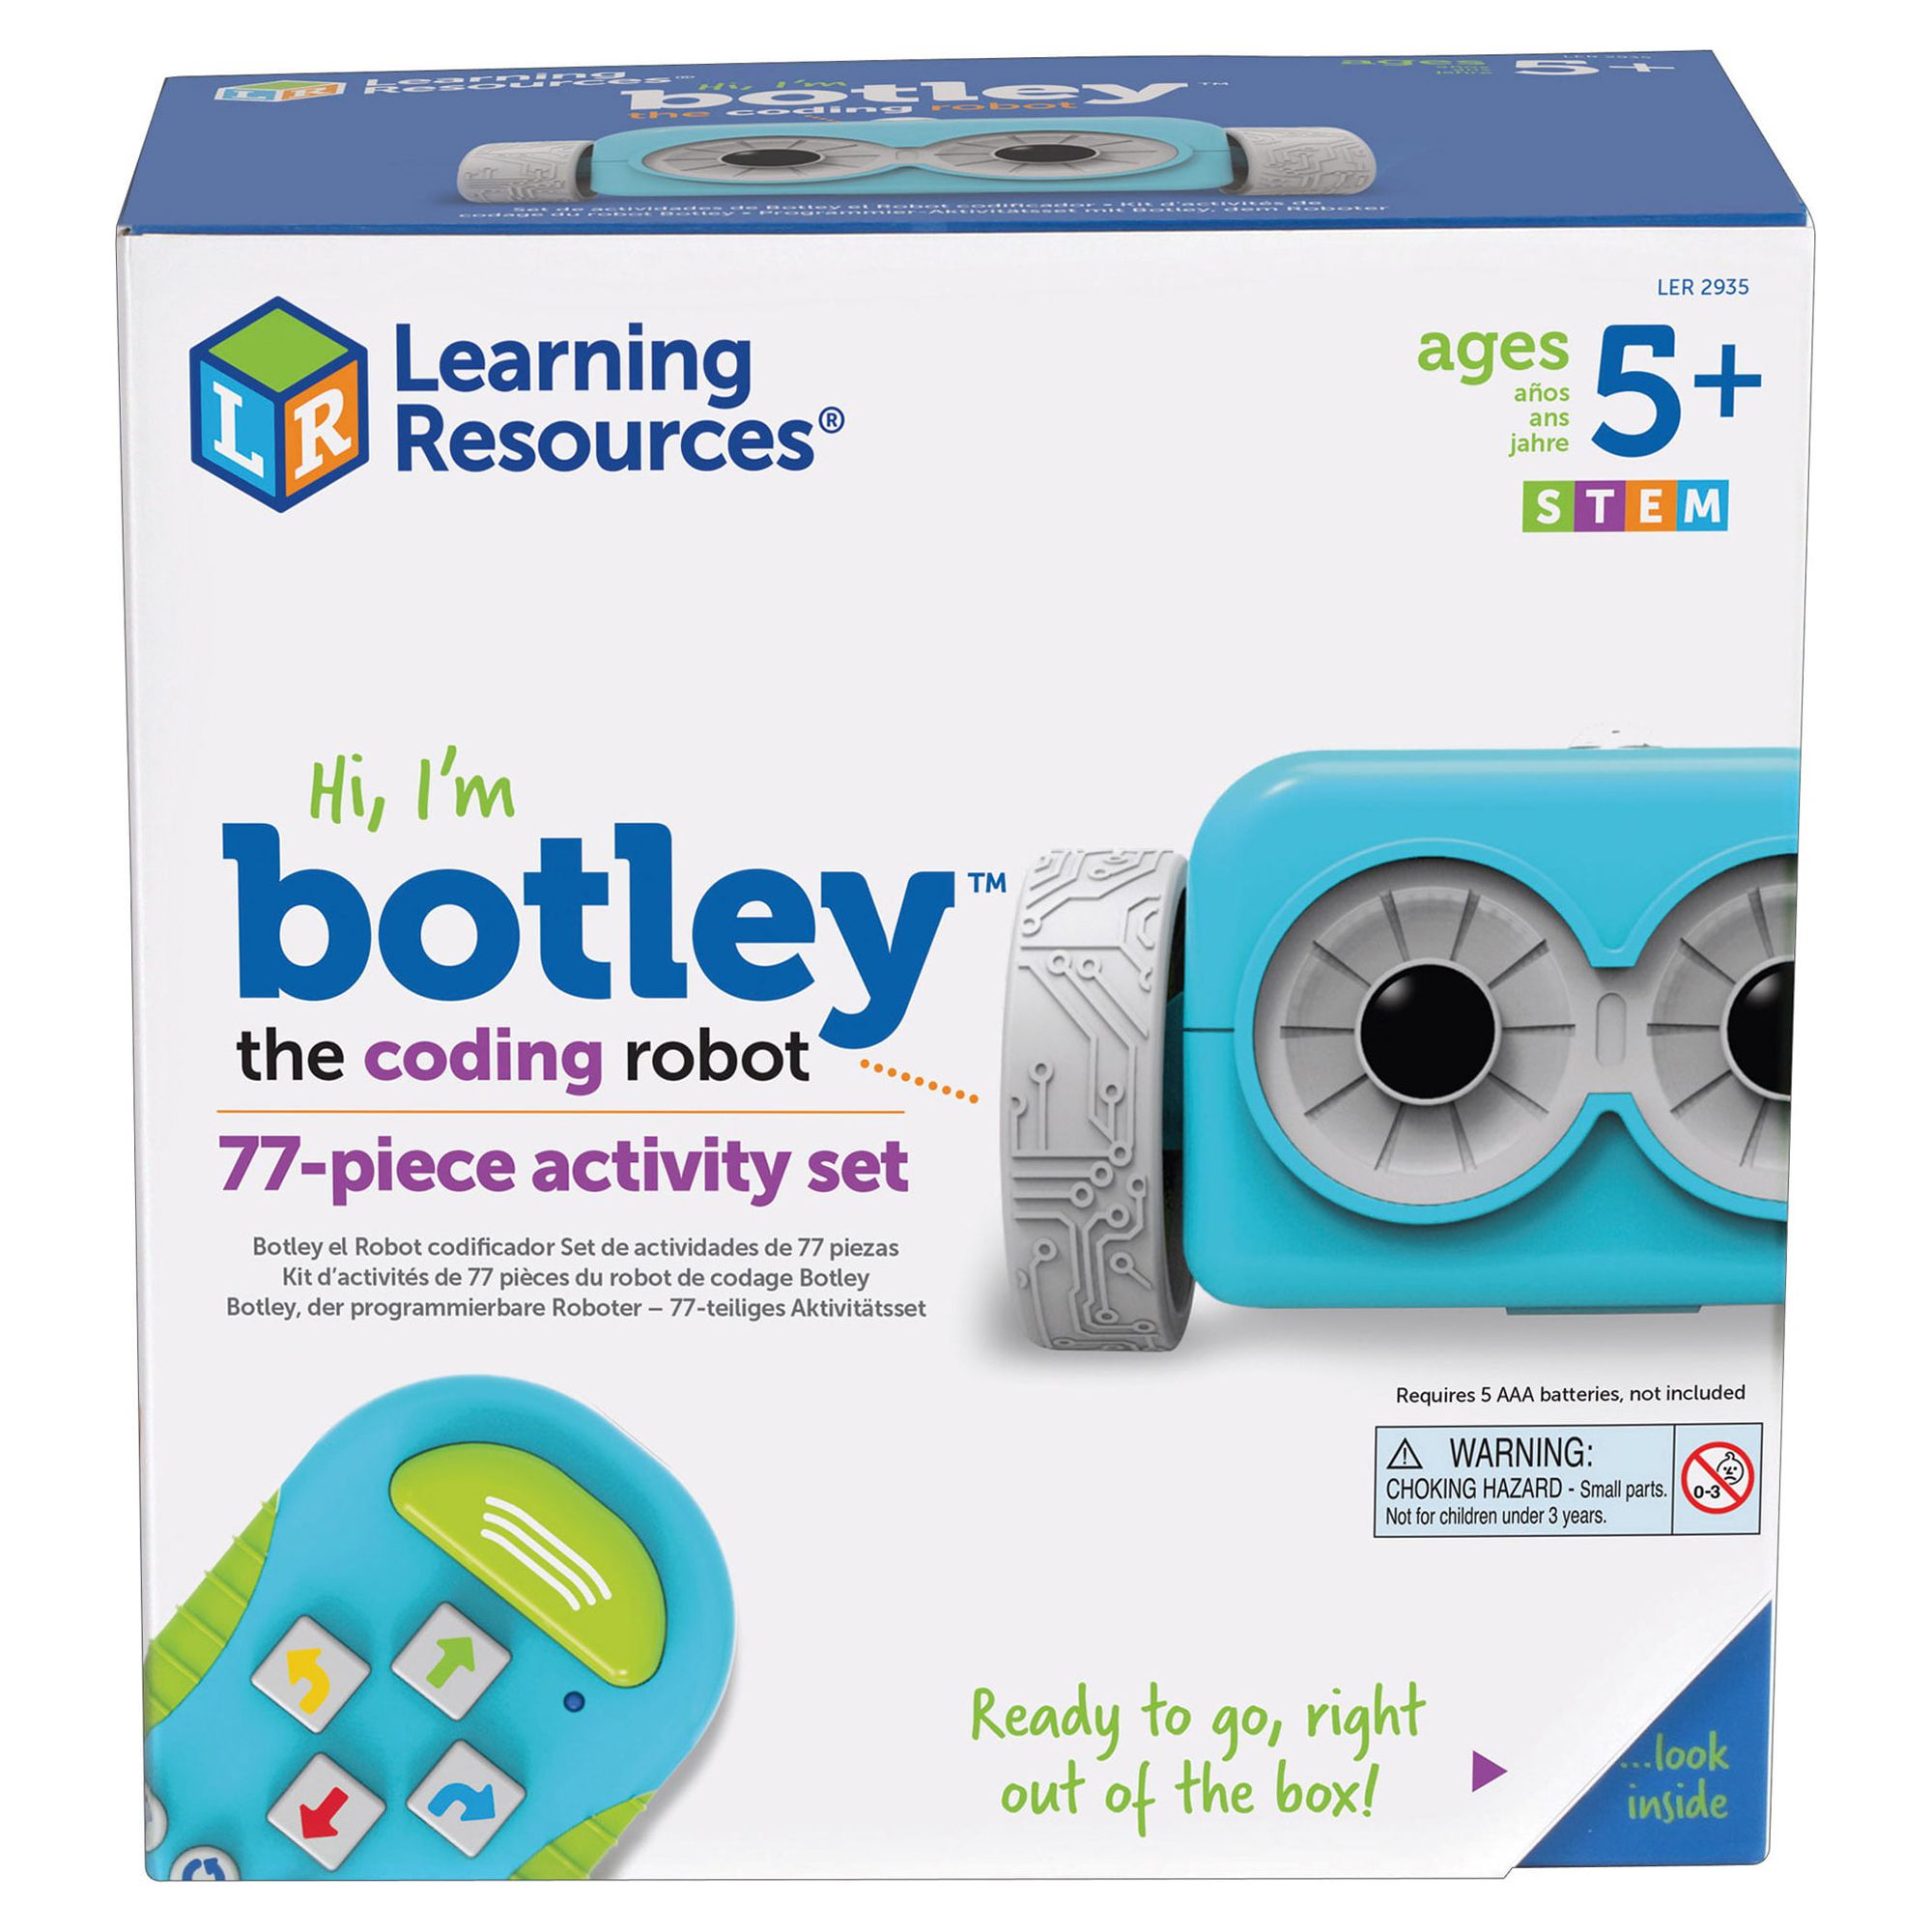 Botley the Coding Robot Activity Set - image 4 of 13